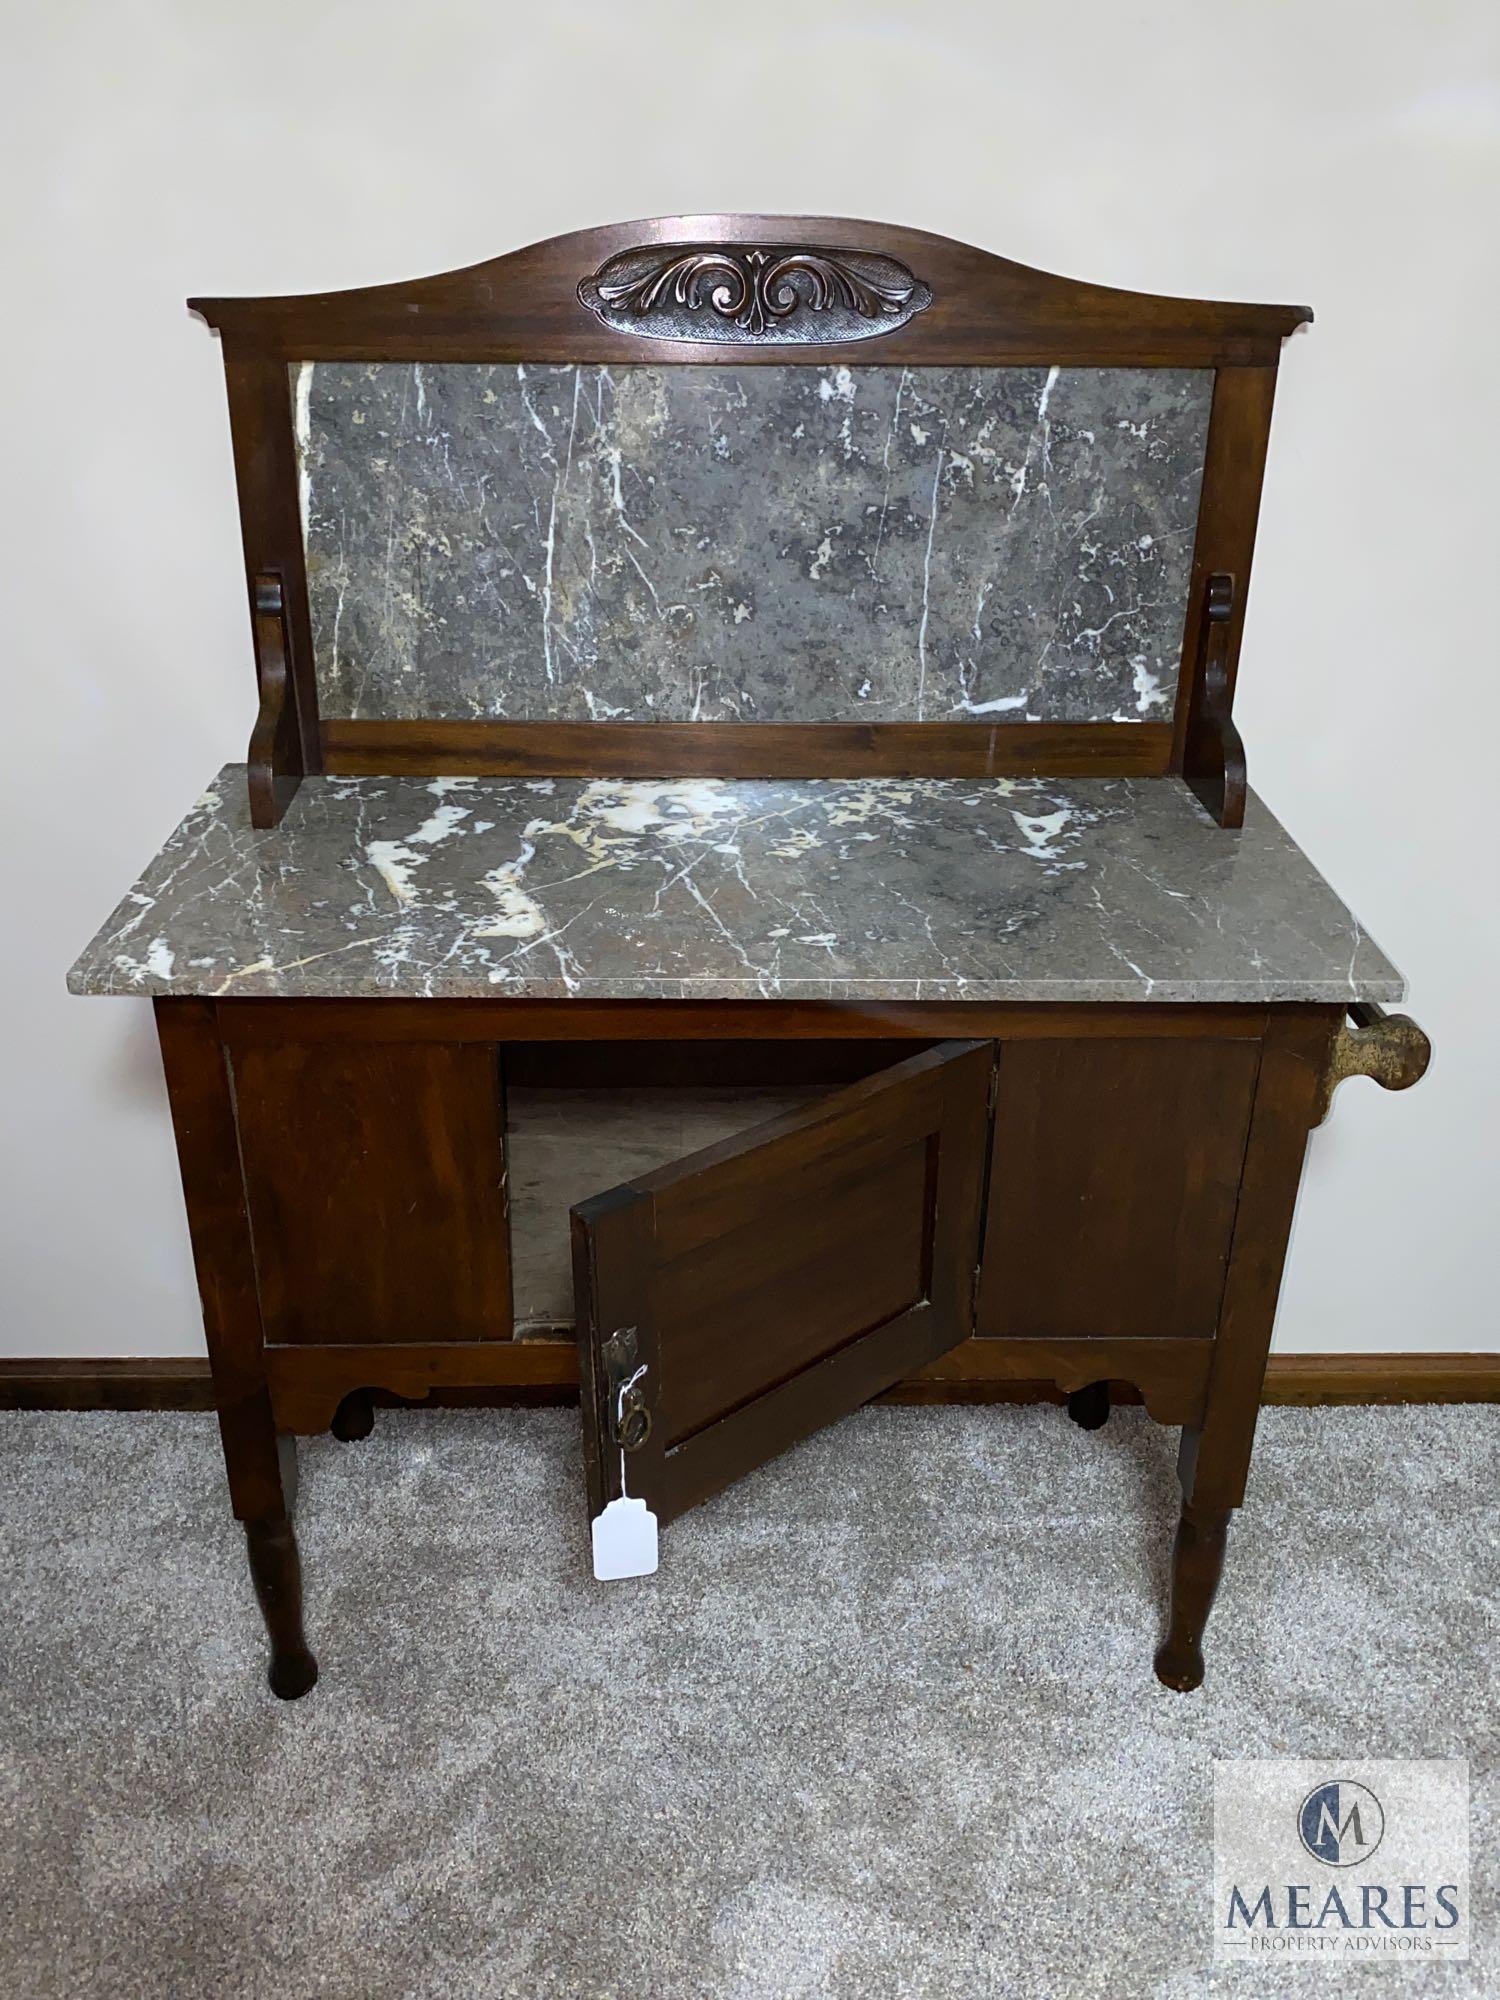 Antique Wood and Marble Washstand